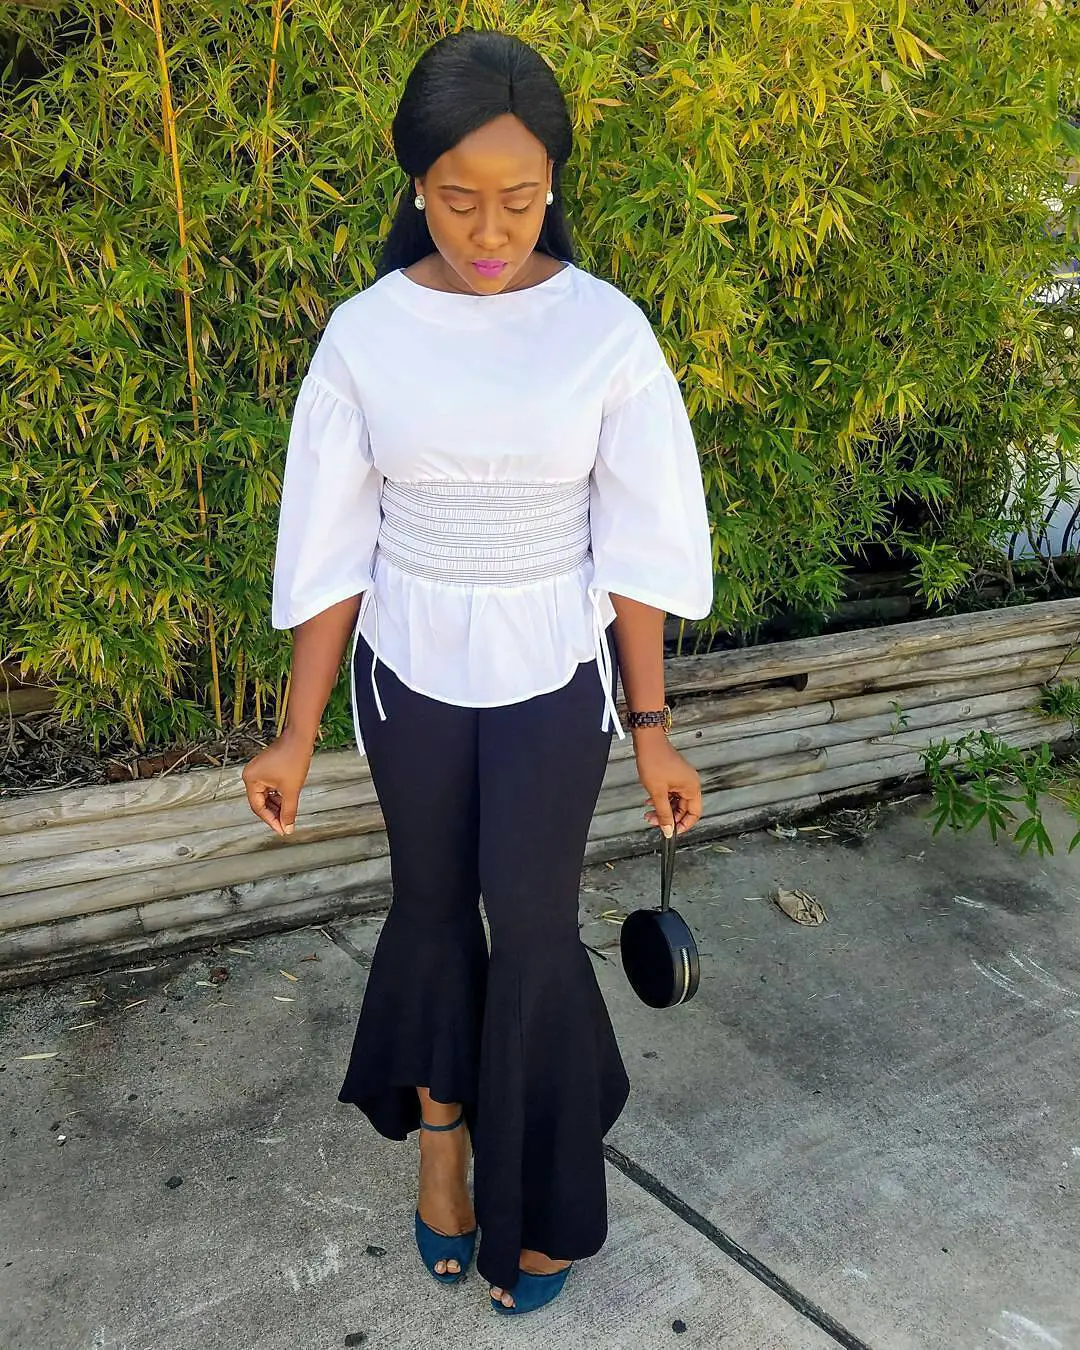 Can You Try These Outfits To Church?